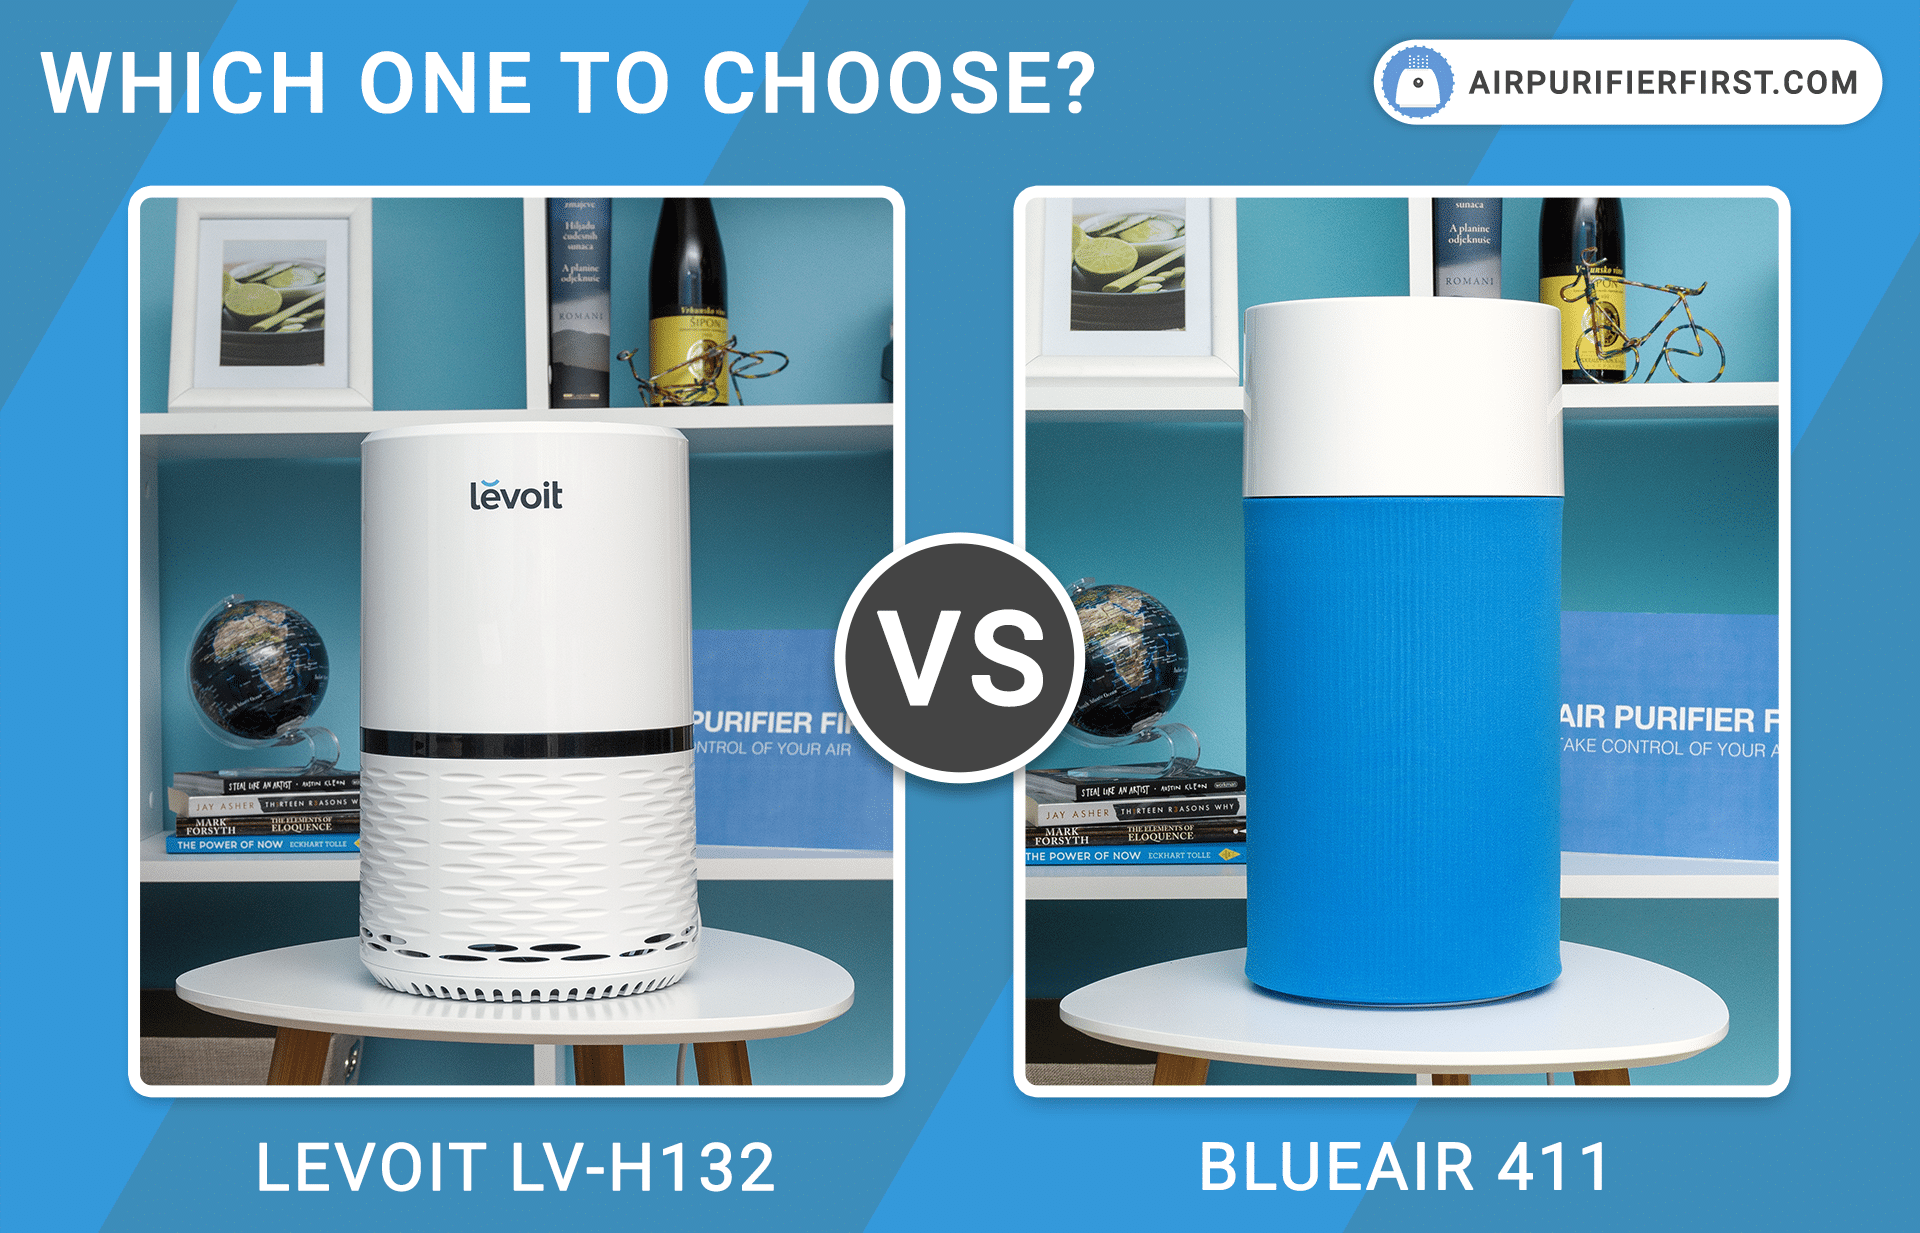 Levoit LV-H132 Air Purifier Review - HEPA Filter Test Results